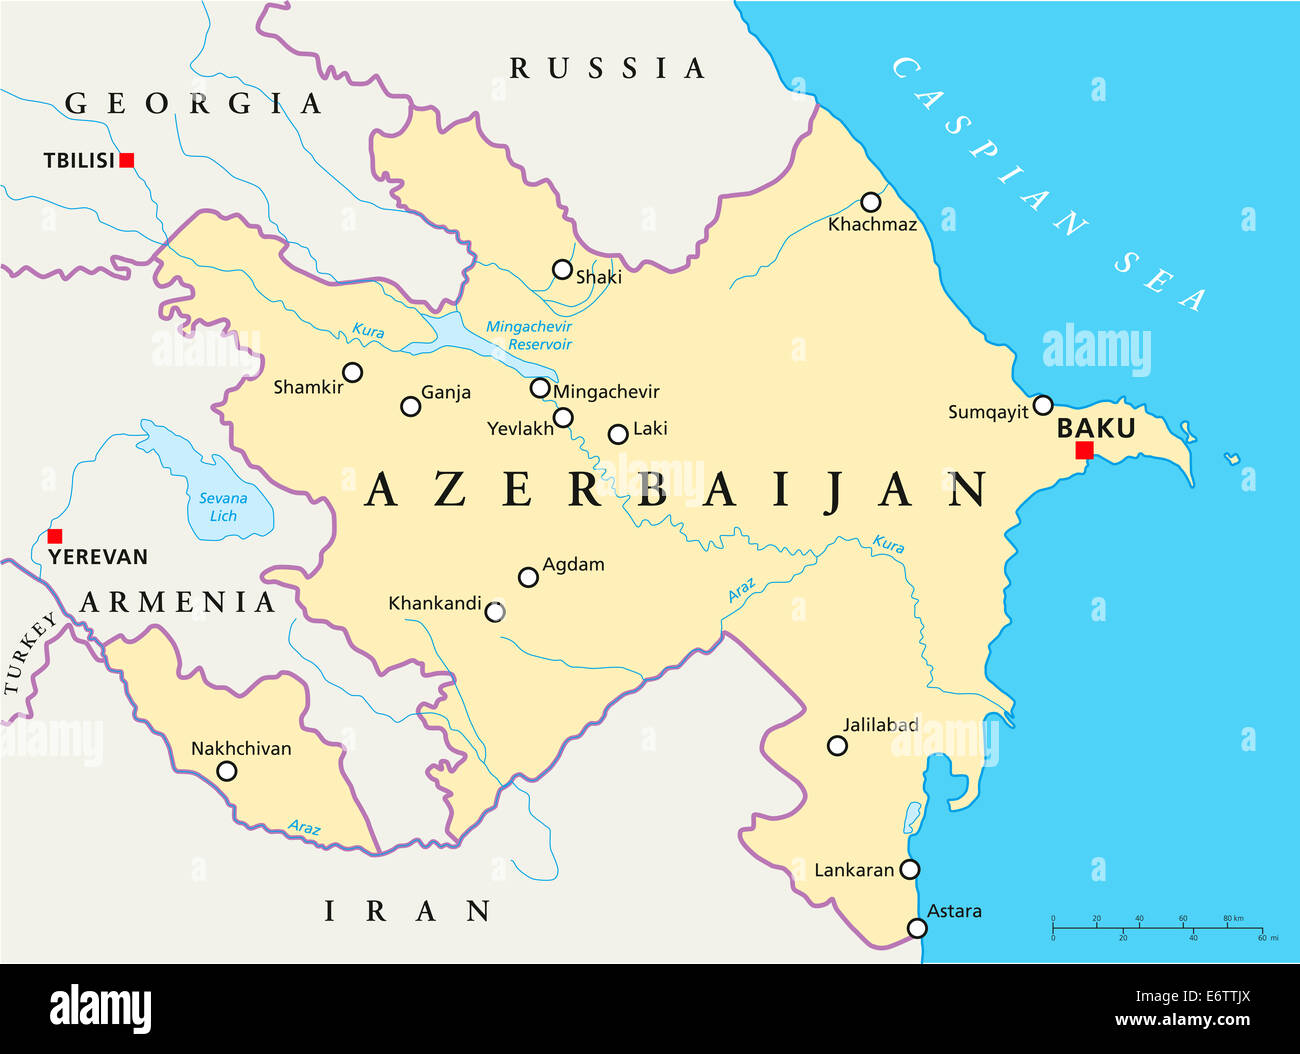 Azerbaijan Political Map with capital Baku, national borders, most important cities, rivers and lakes. English labeling. Stock Photo